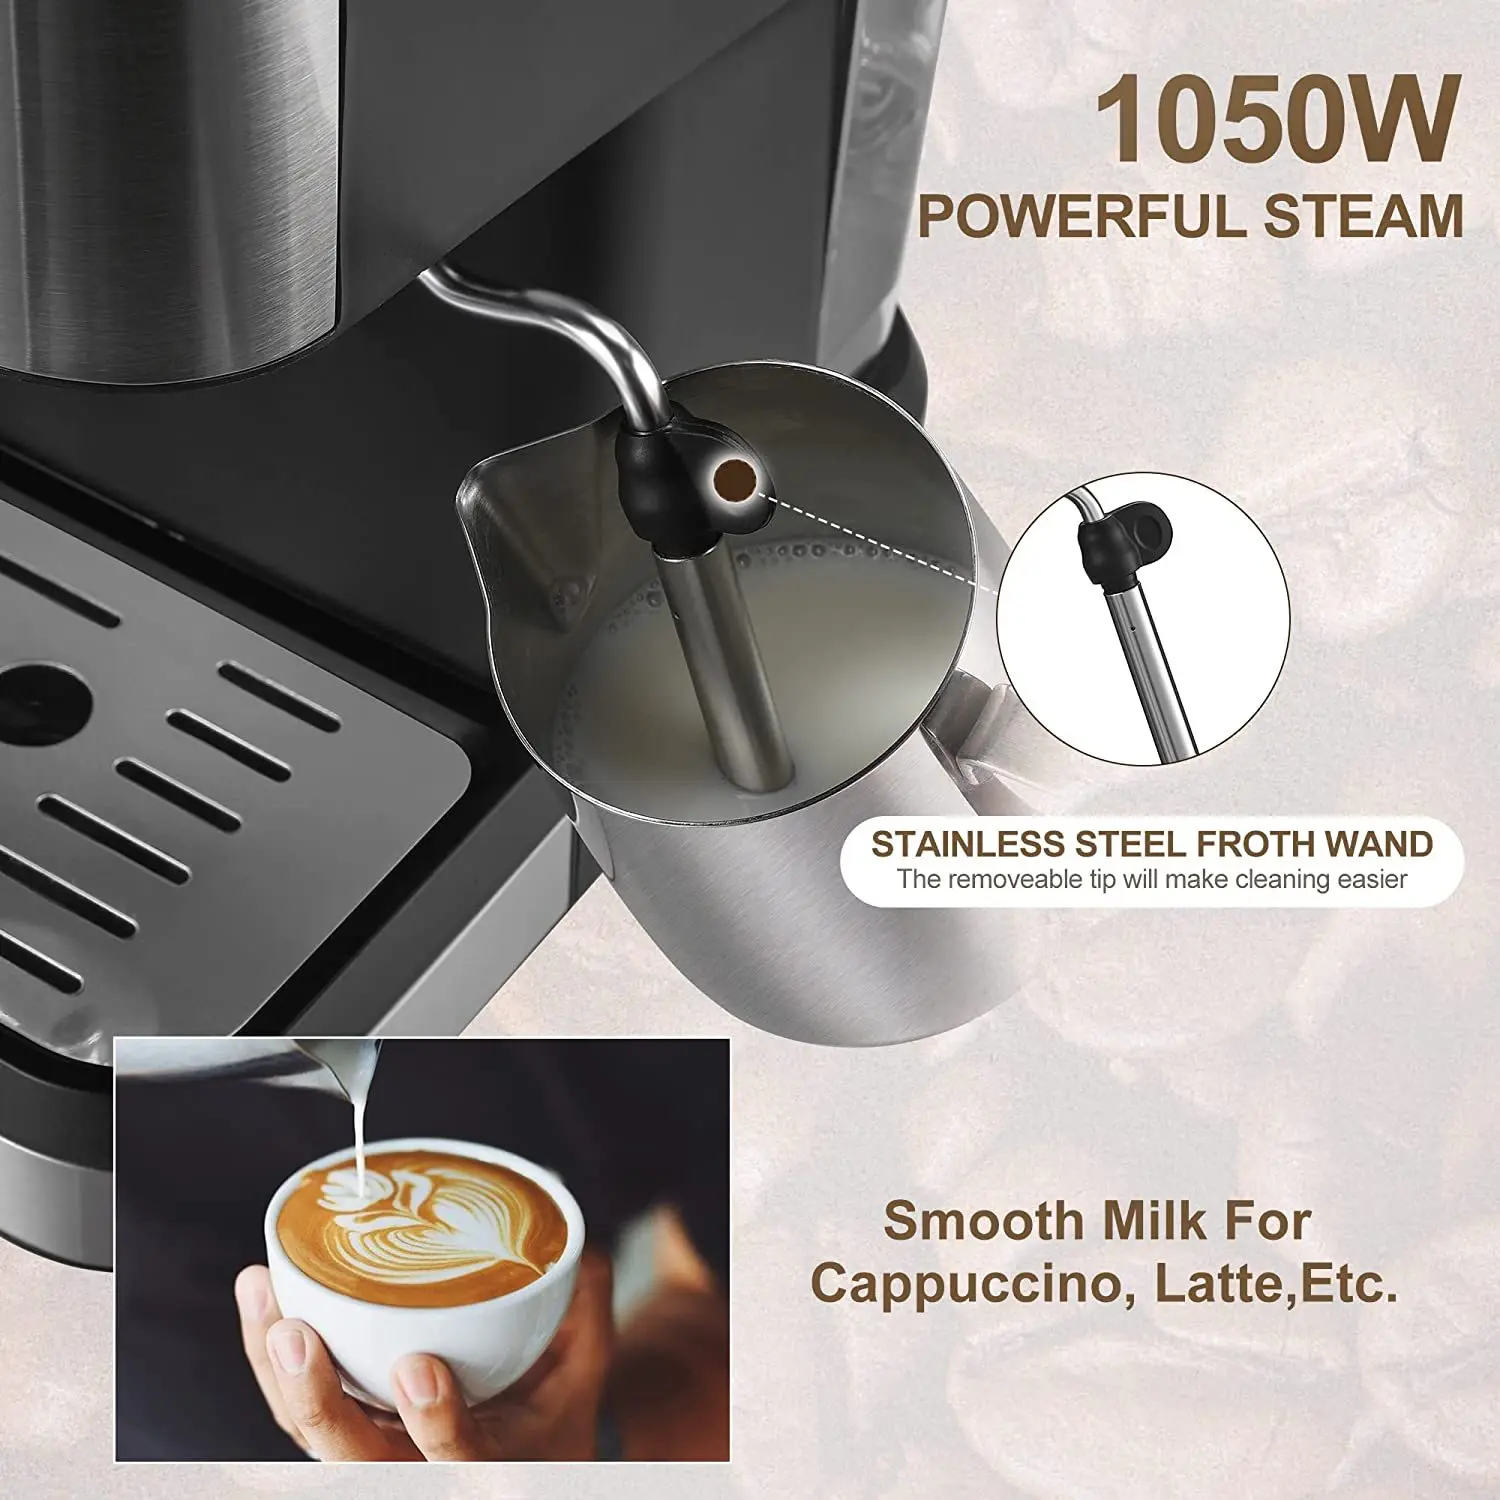 https://ae01.alicdn.com/kf/S6748c7e2fb014b0ea5bf1ec63a768427l/CM3010-Household-Multifunction-Coffee-Maker-1-5L-Large-Capacity-1050W-Strong-Power-Espresso-Cafe-Maker.jpg